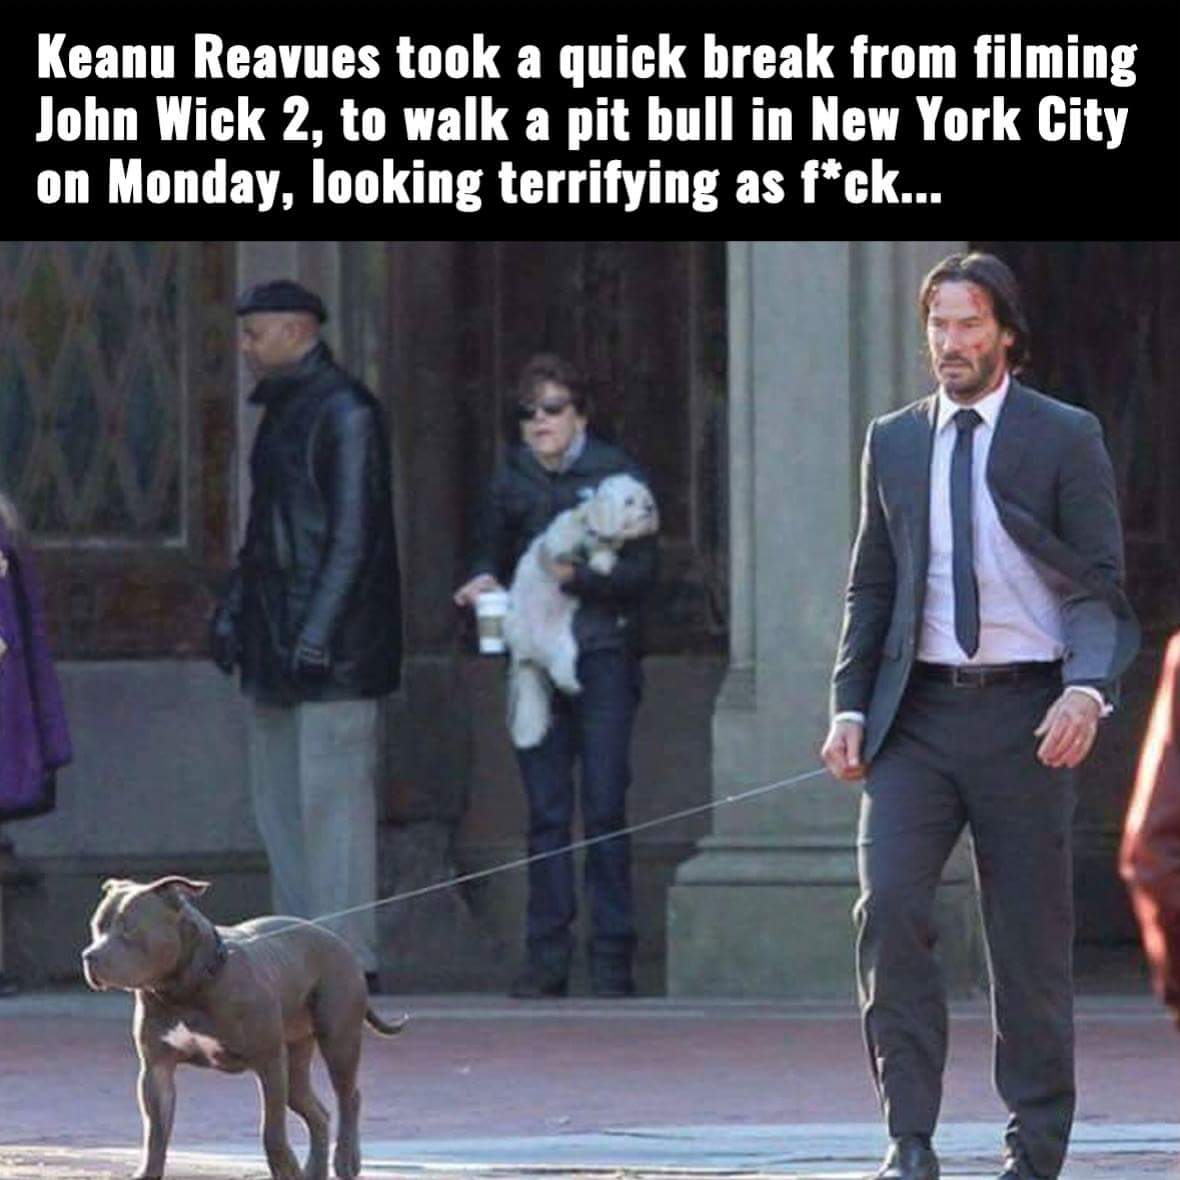 keanu reeves meme - Keanu Reavues took a quick break from filming John Wick 2, to walk a pit bull in New York City on Monday, looking terrifying as fck...